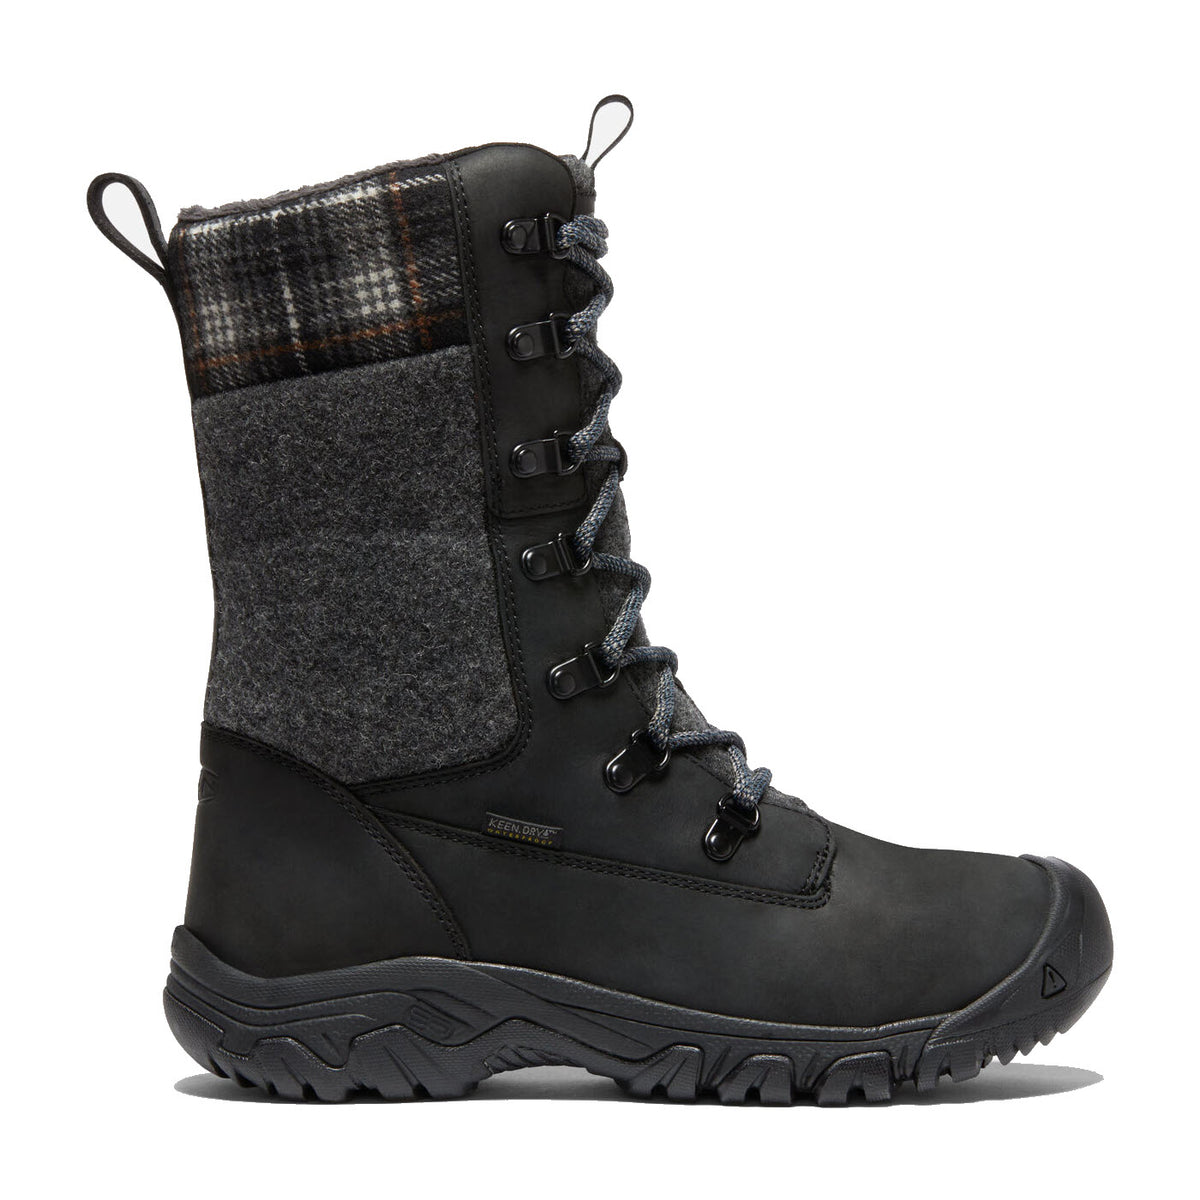 Men&#39;s winter boot with plaid detailing, lace-up front, and Keen.Dry membrane.